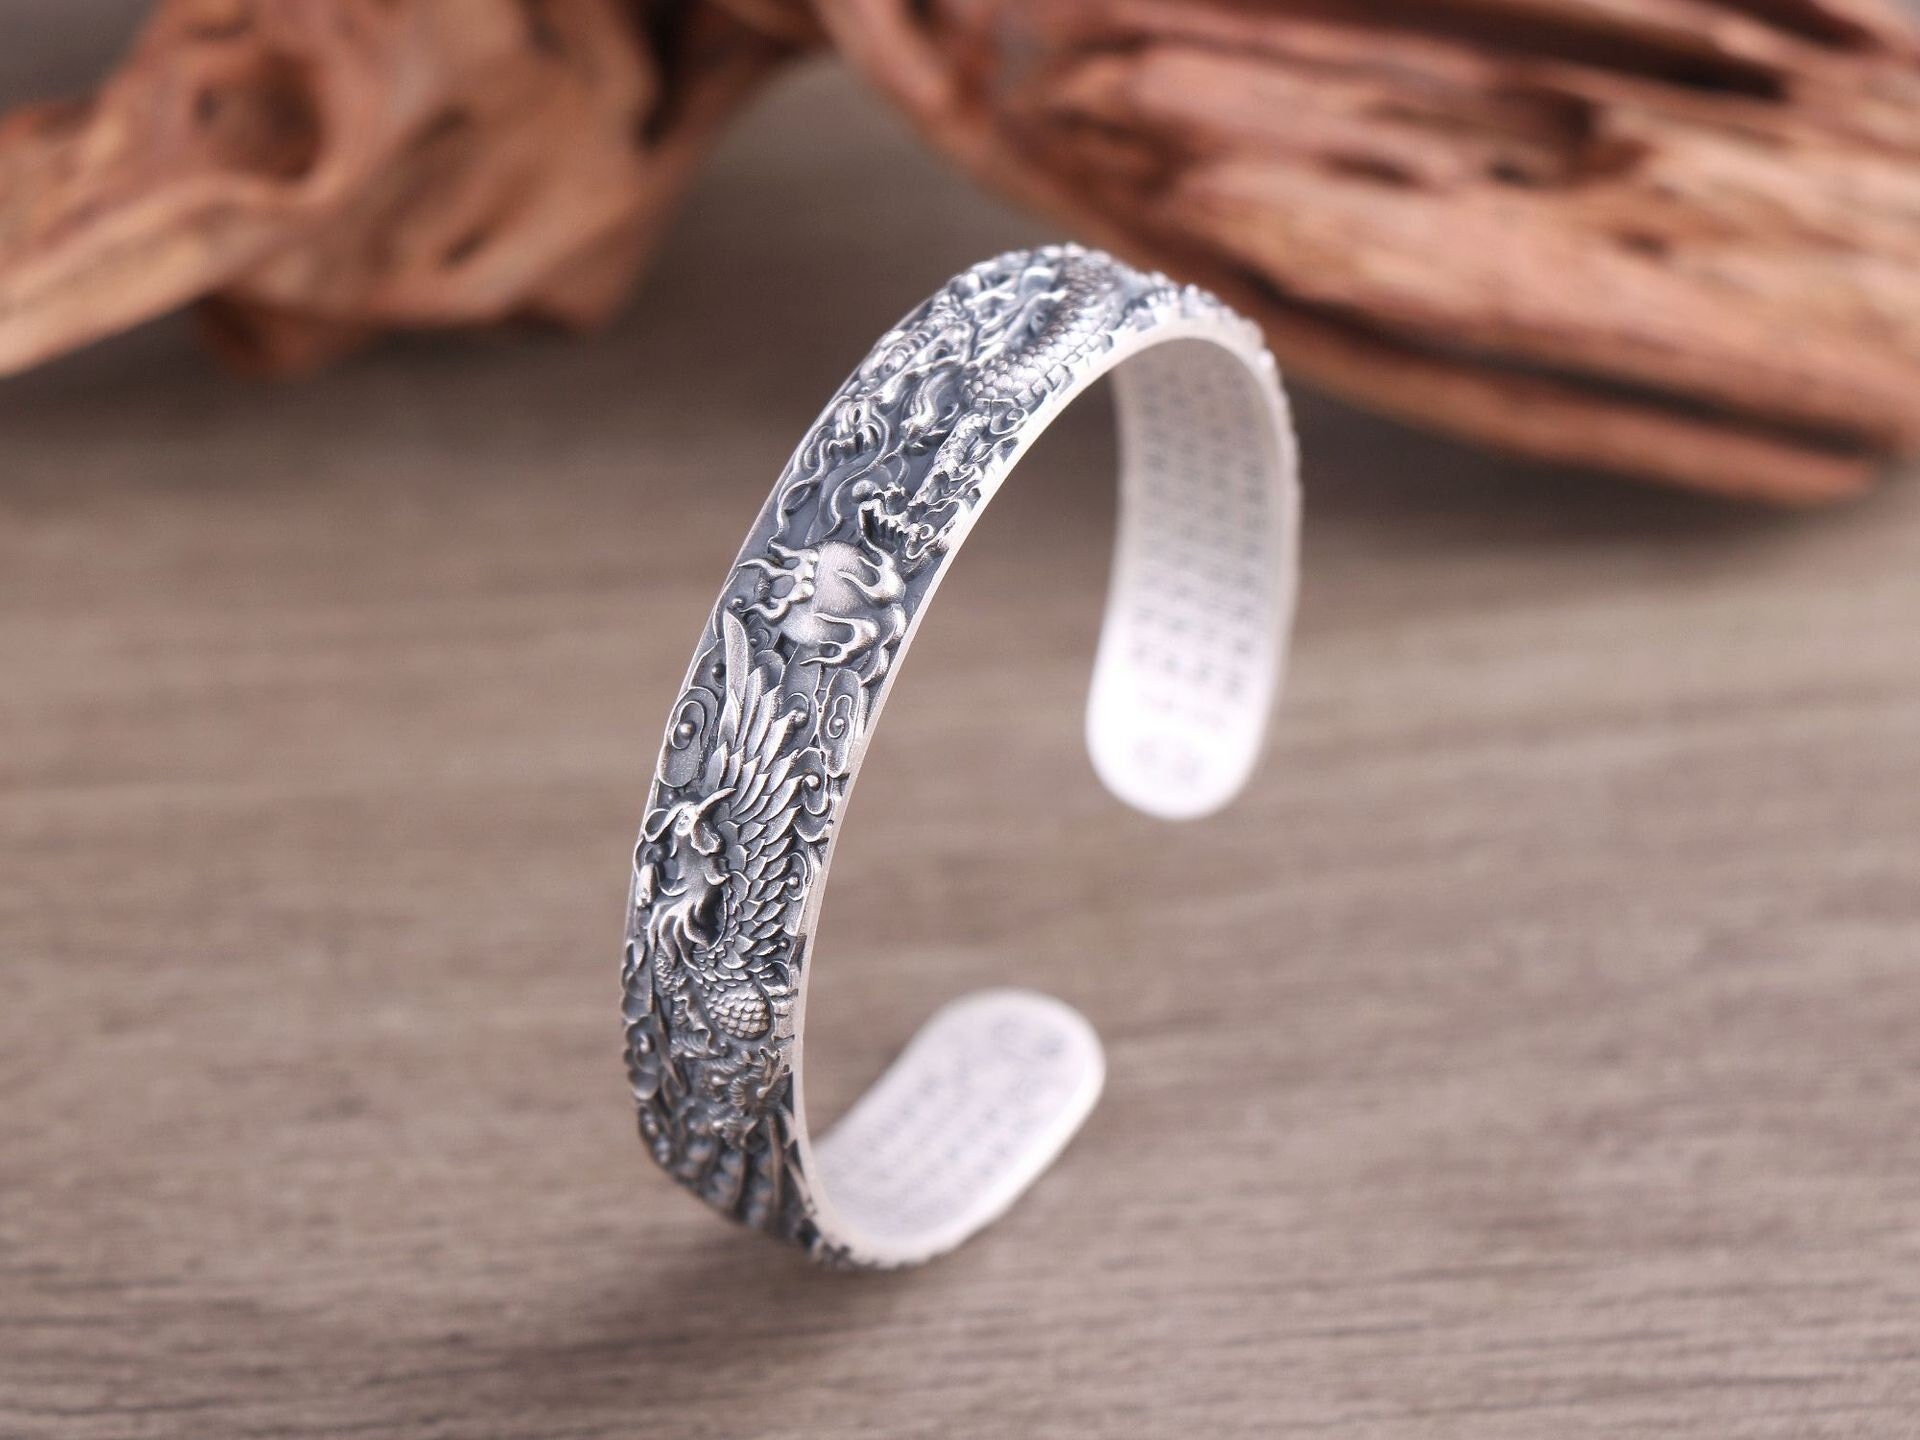 Elegant Phoenix 999 Stamp Silver Cuff Sterling Silver Bangle Bracelets For  Women Fashionable Party And Holiday Gift Inte22 From Interpretery, $11.25